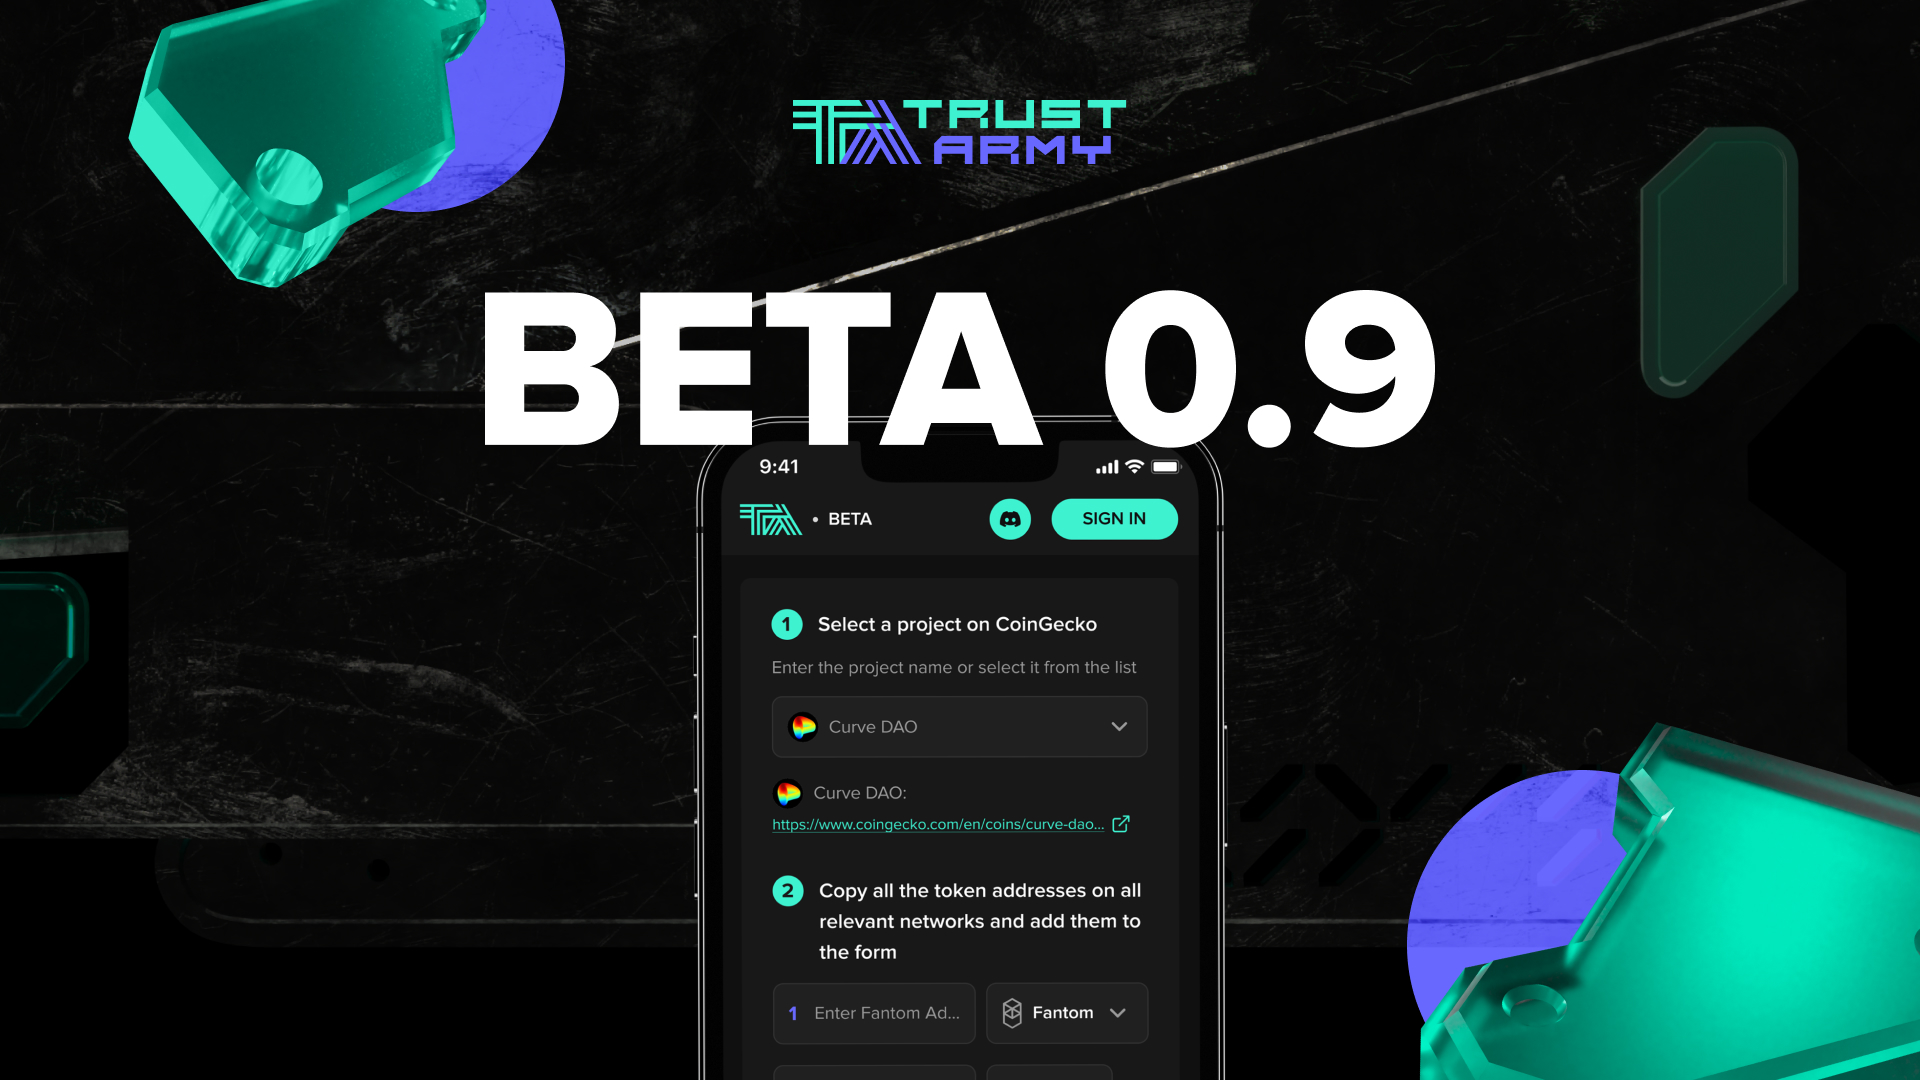 Trust Army Beta 0.9: Complete On-Chain Missions on Your Smartphone